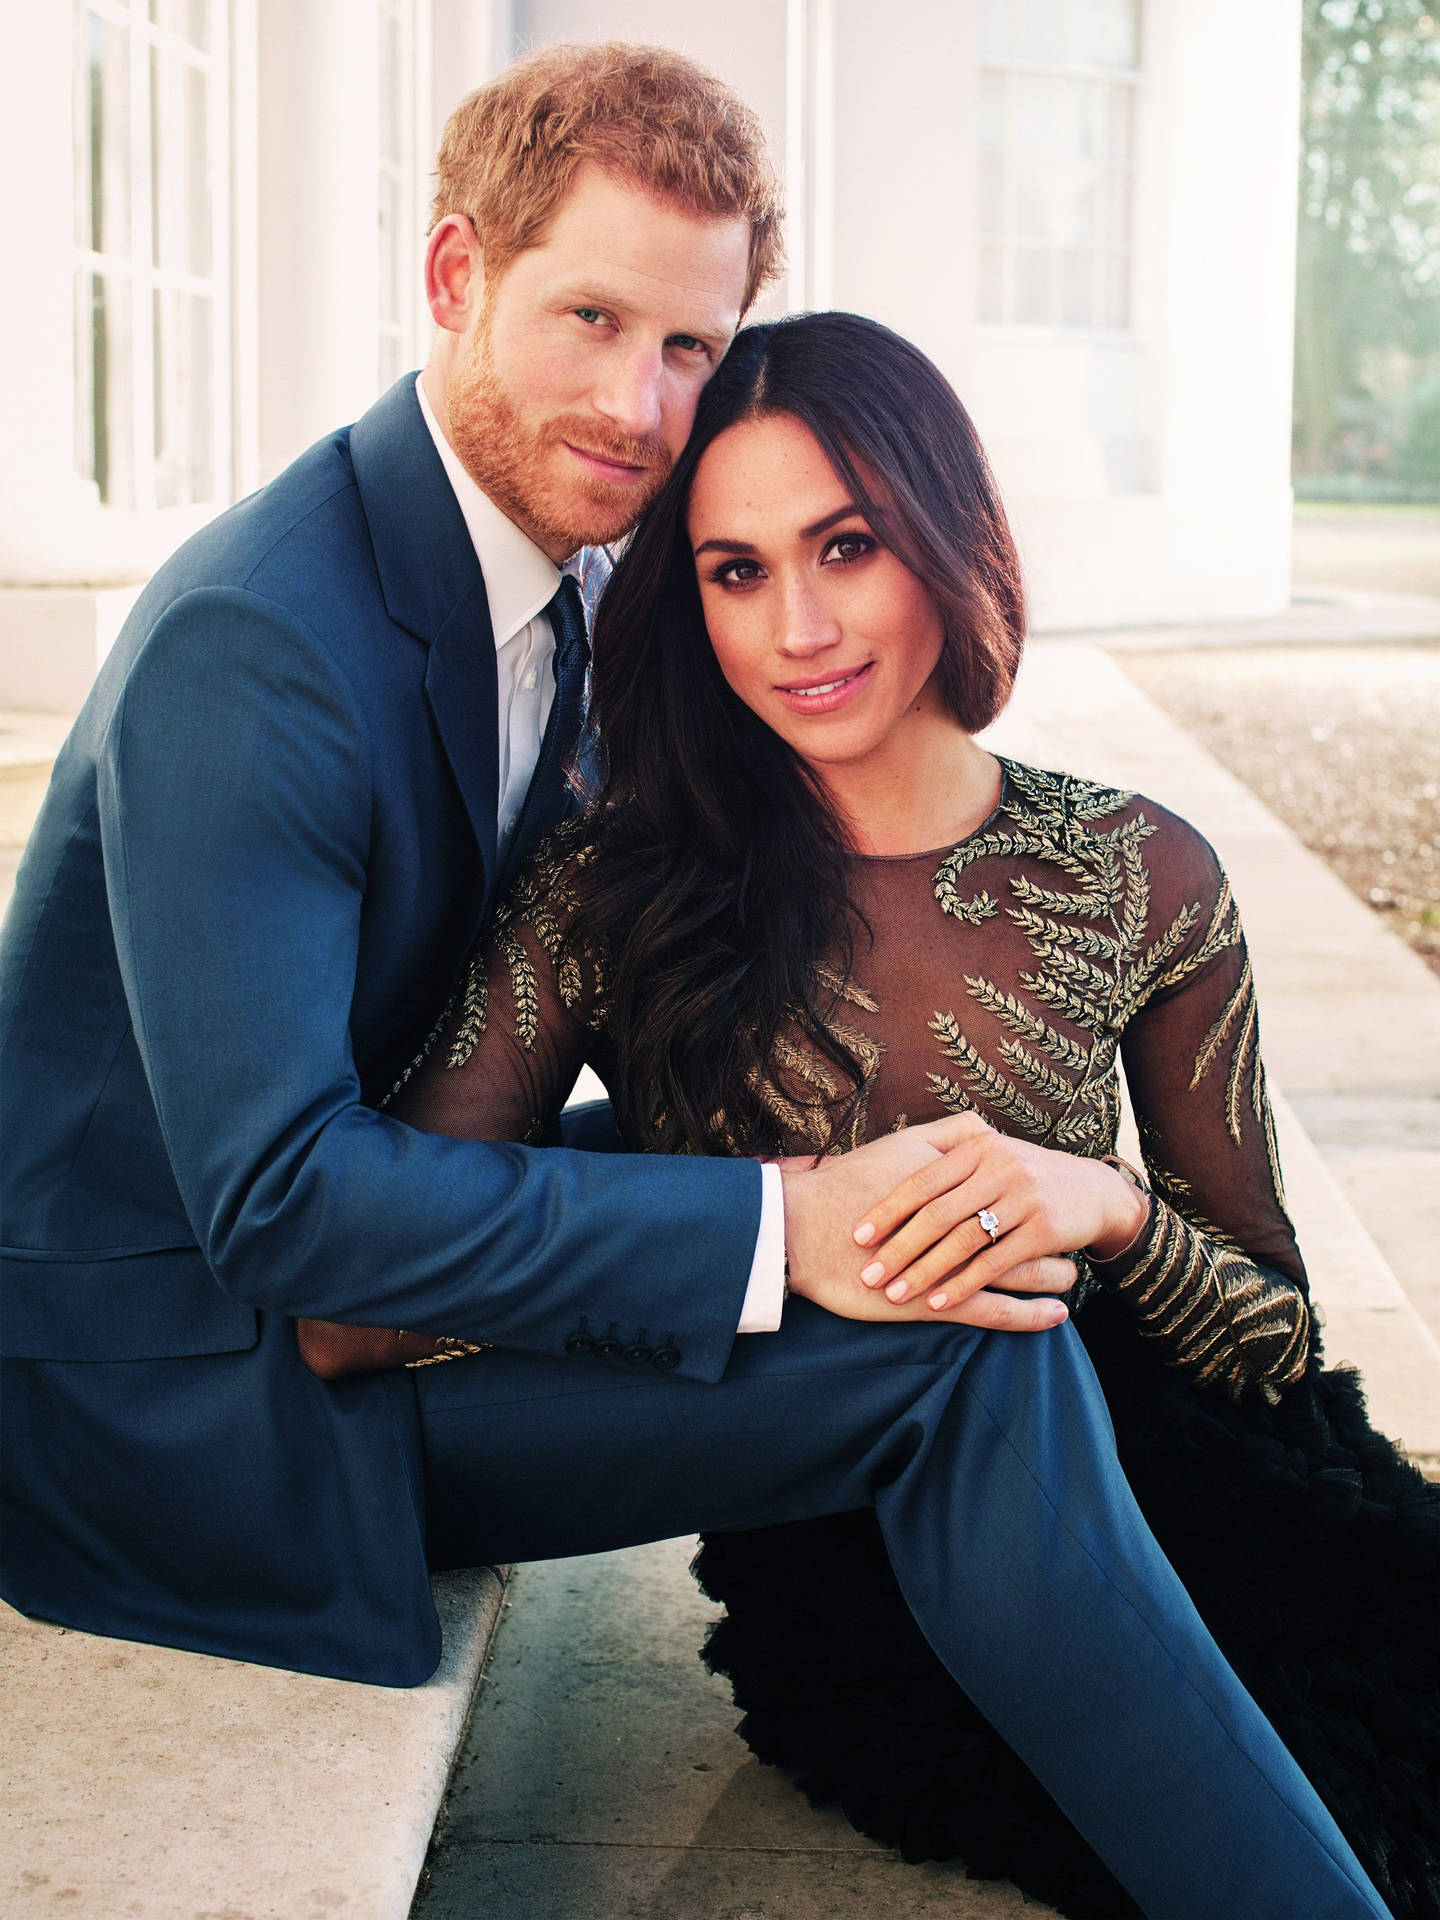 Prince Harry And Meghan Markle Relationship